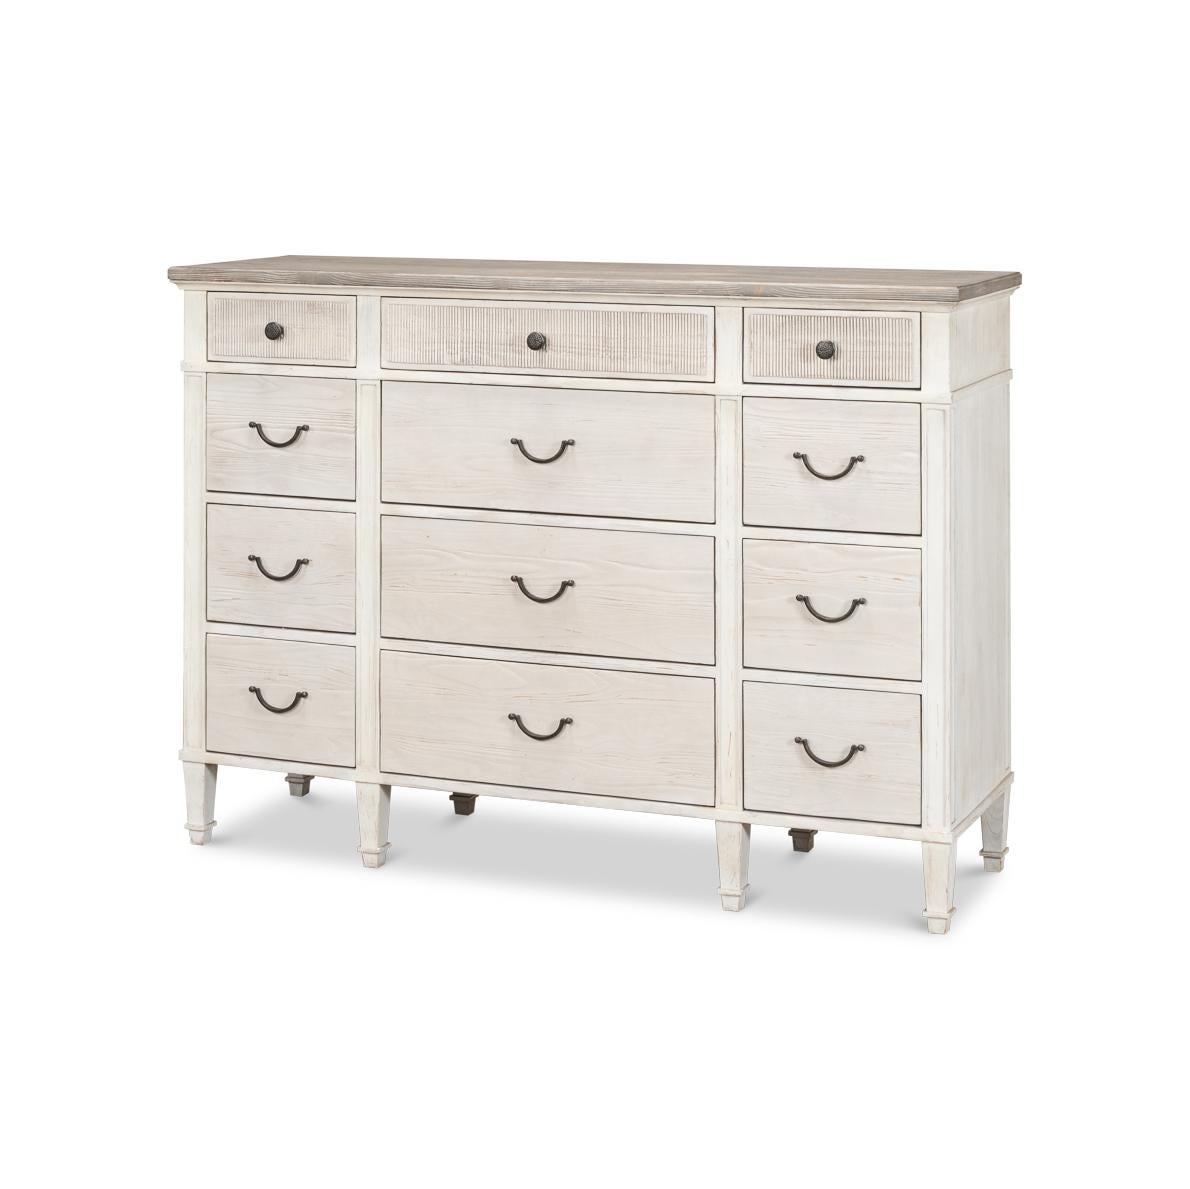 White Painted Bungalow Dresser For Sale